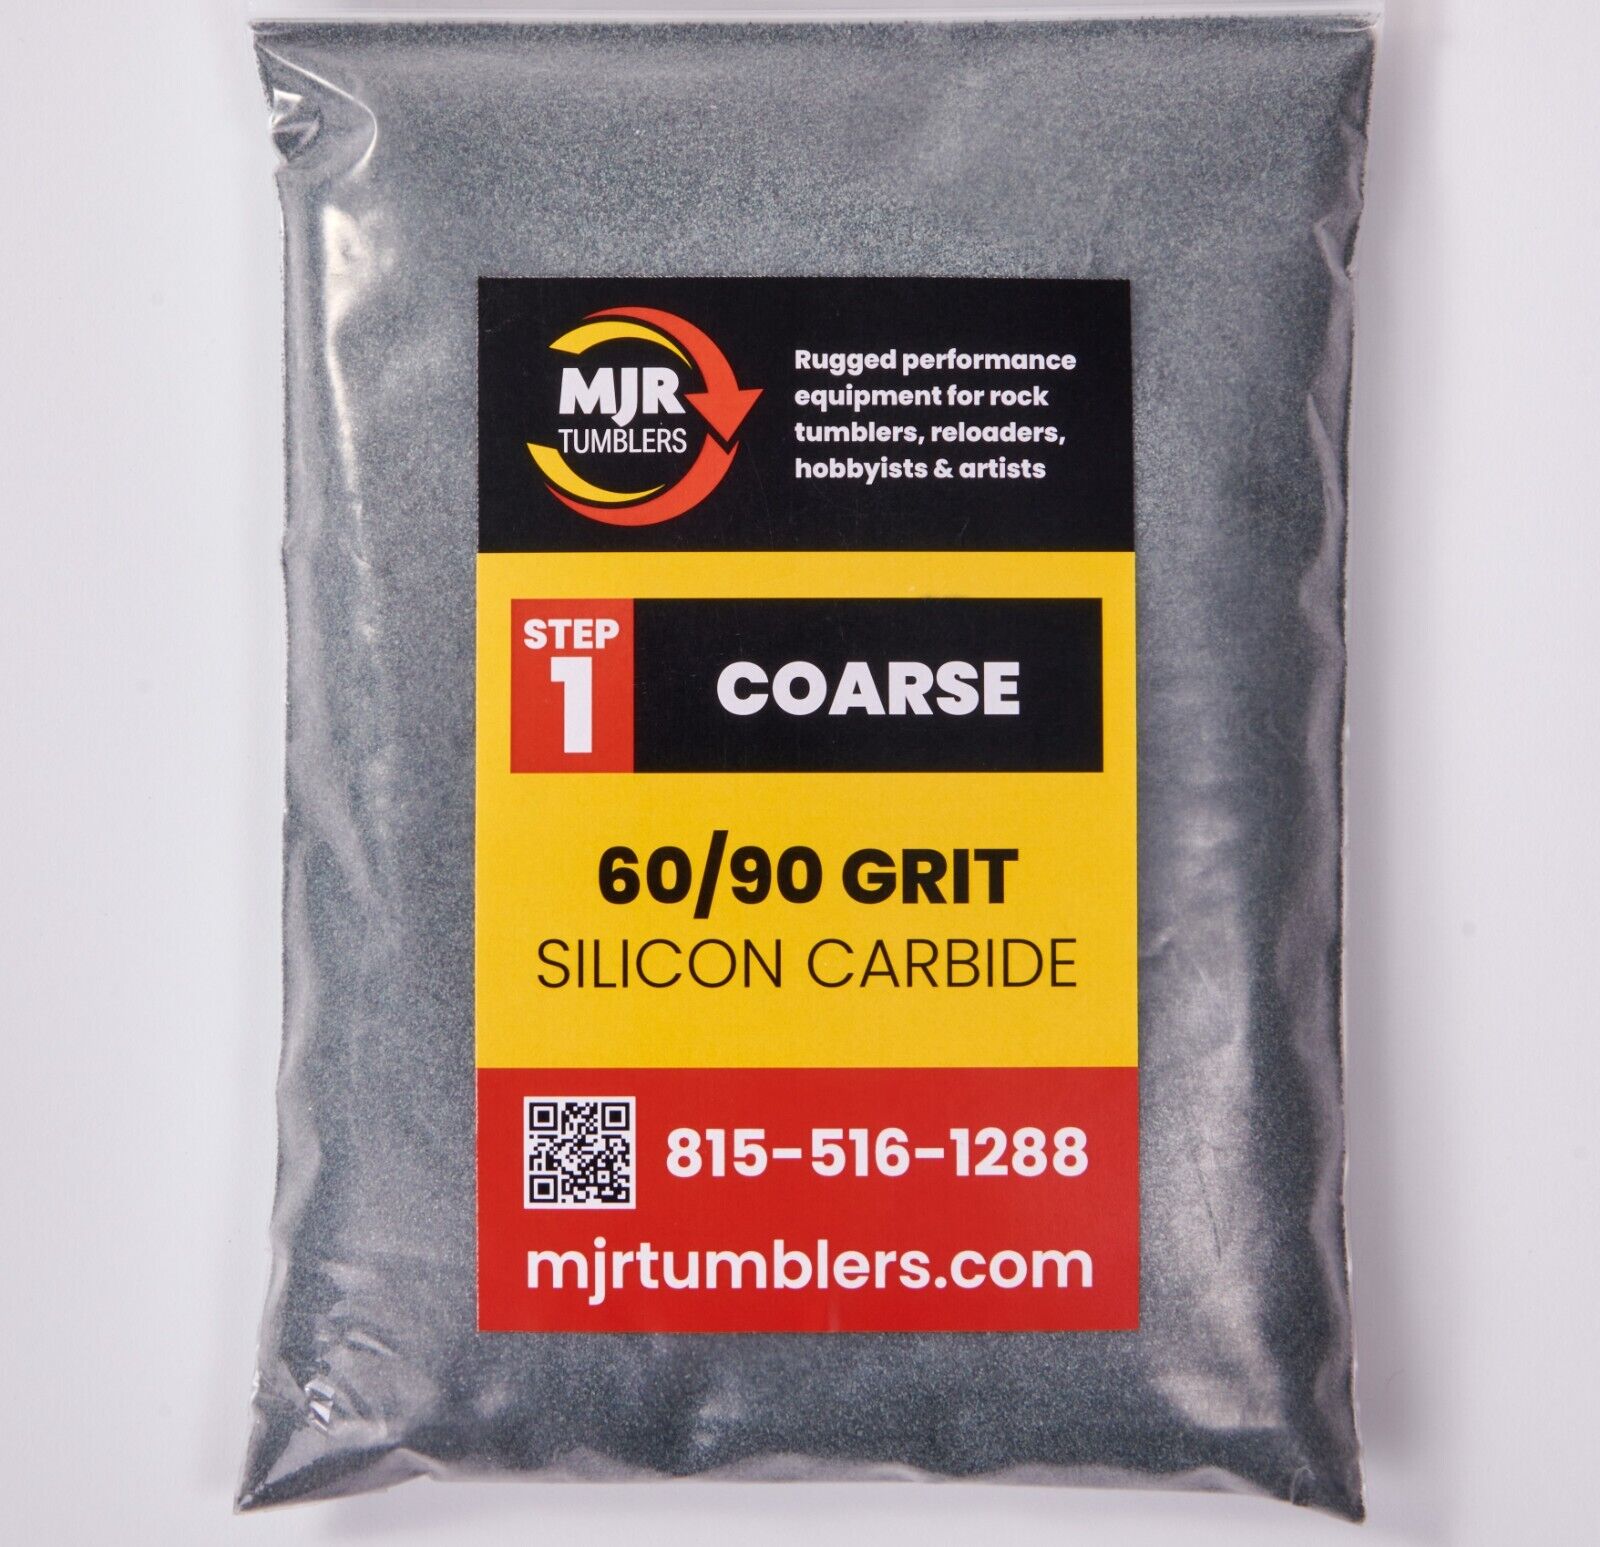 1 lb of 60/90 Grit Coarse Rock Tumbling Silicon Carbide Polish for Lapidary use